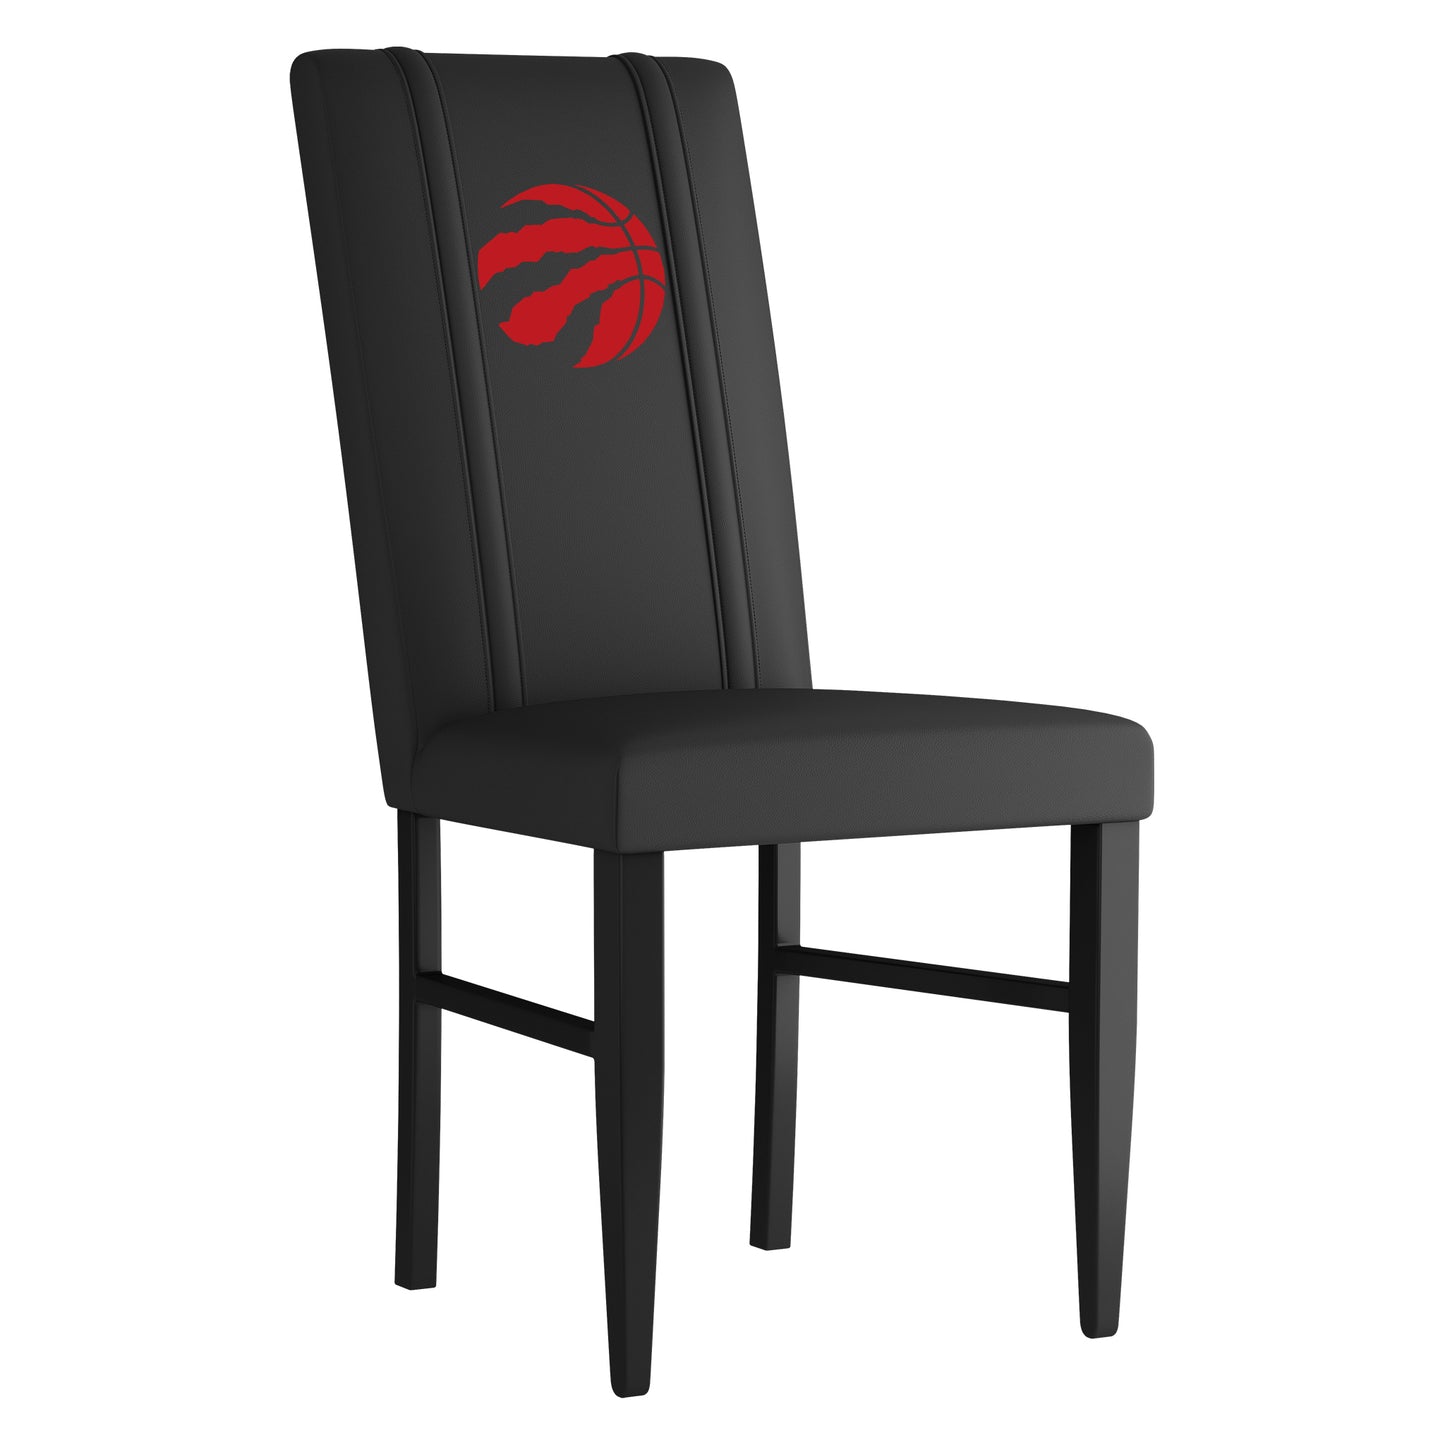 Side Chair 2000 with Toronto Raptors Primary Red Logo Set of 2